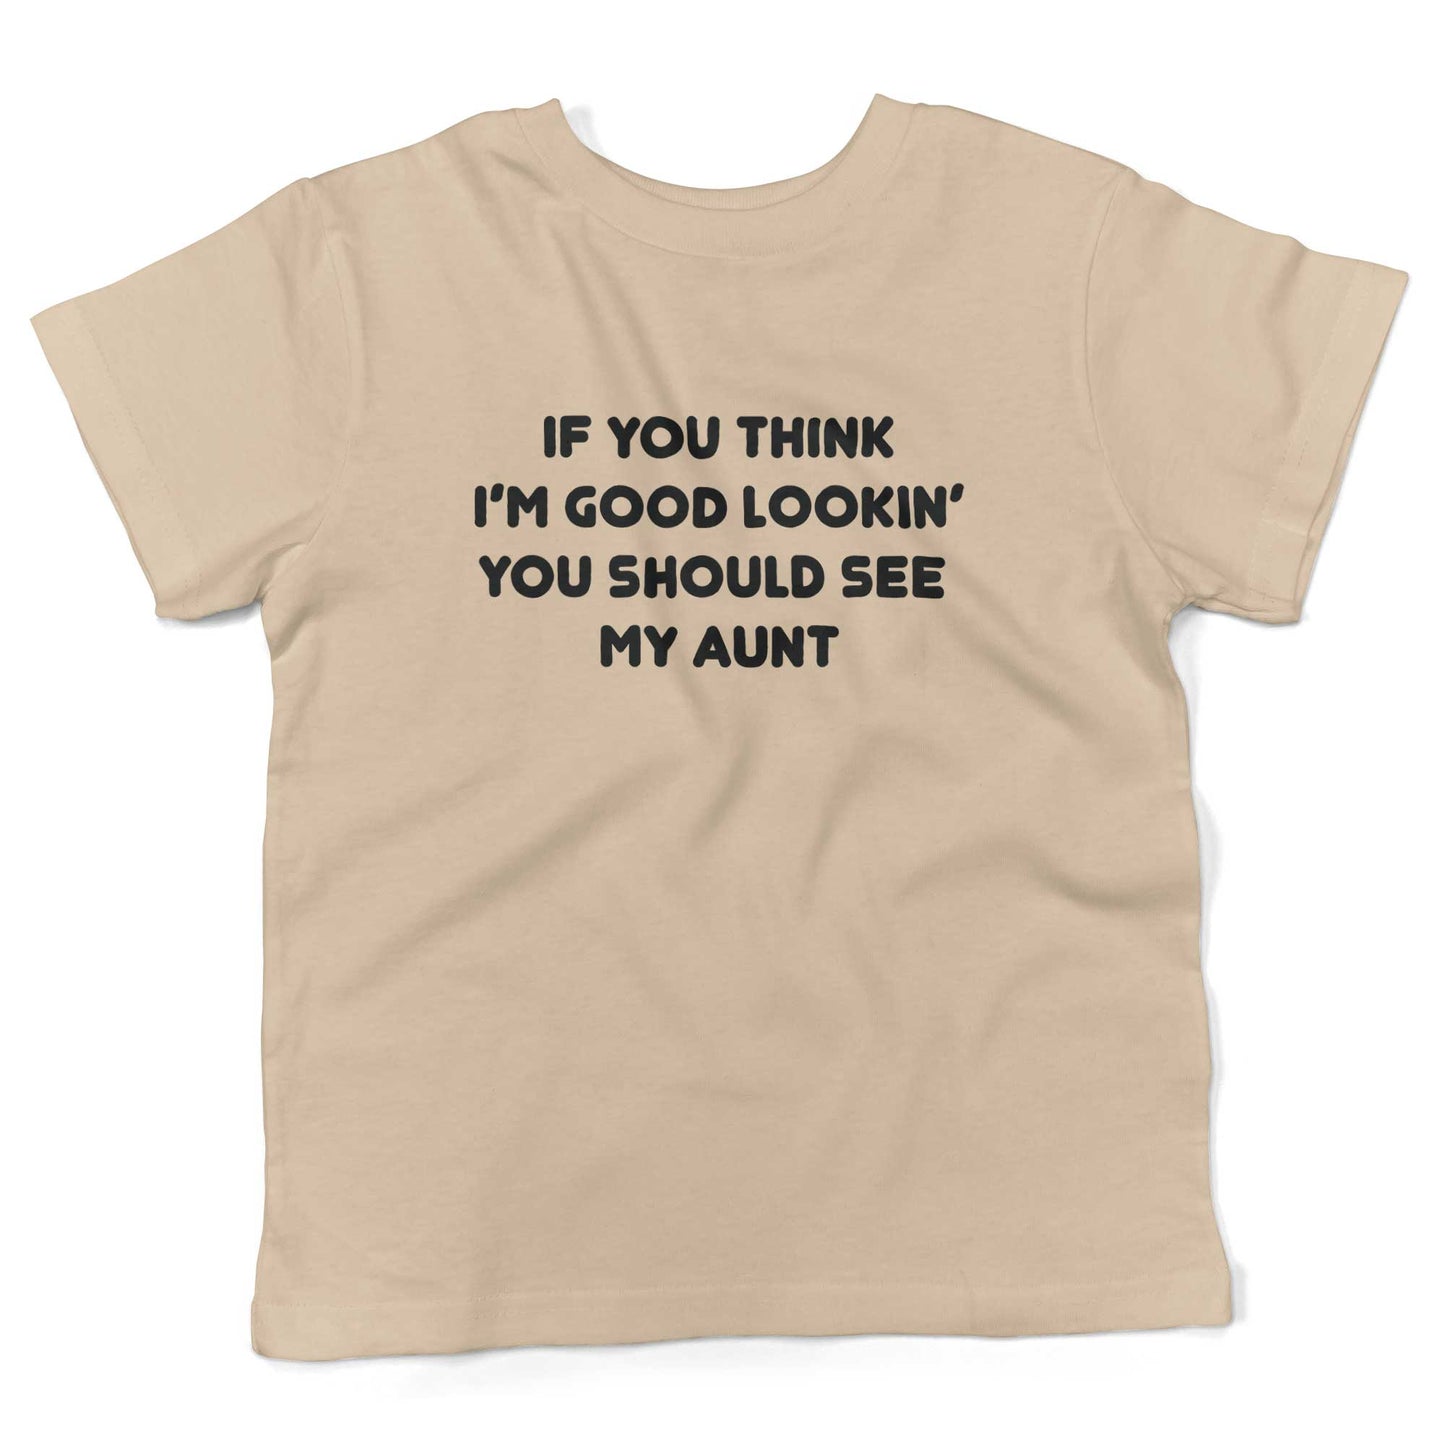 If You Think I'm Good Lookin' You Should See My Aunt Toddler Shirt-Organic Natural-2T